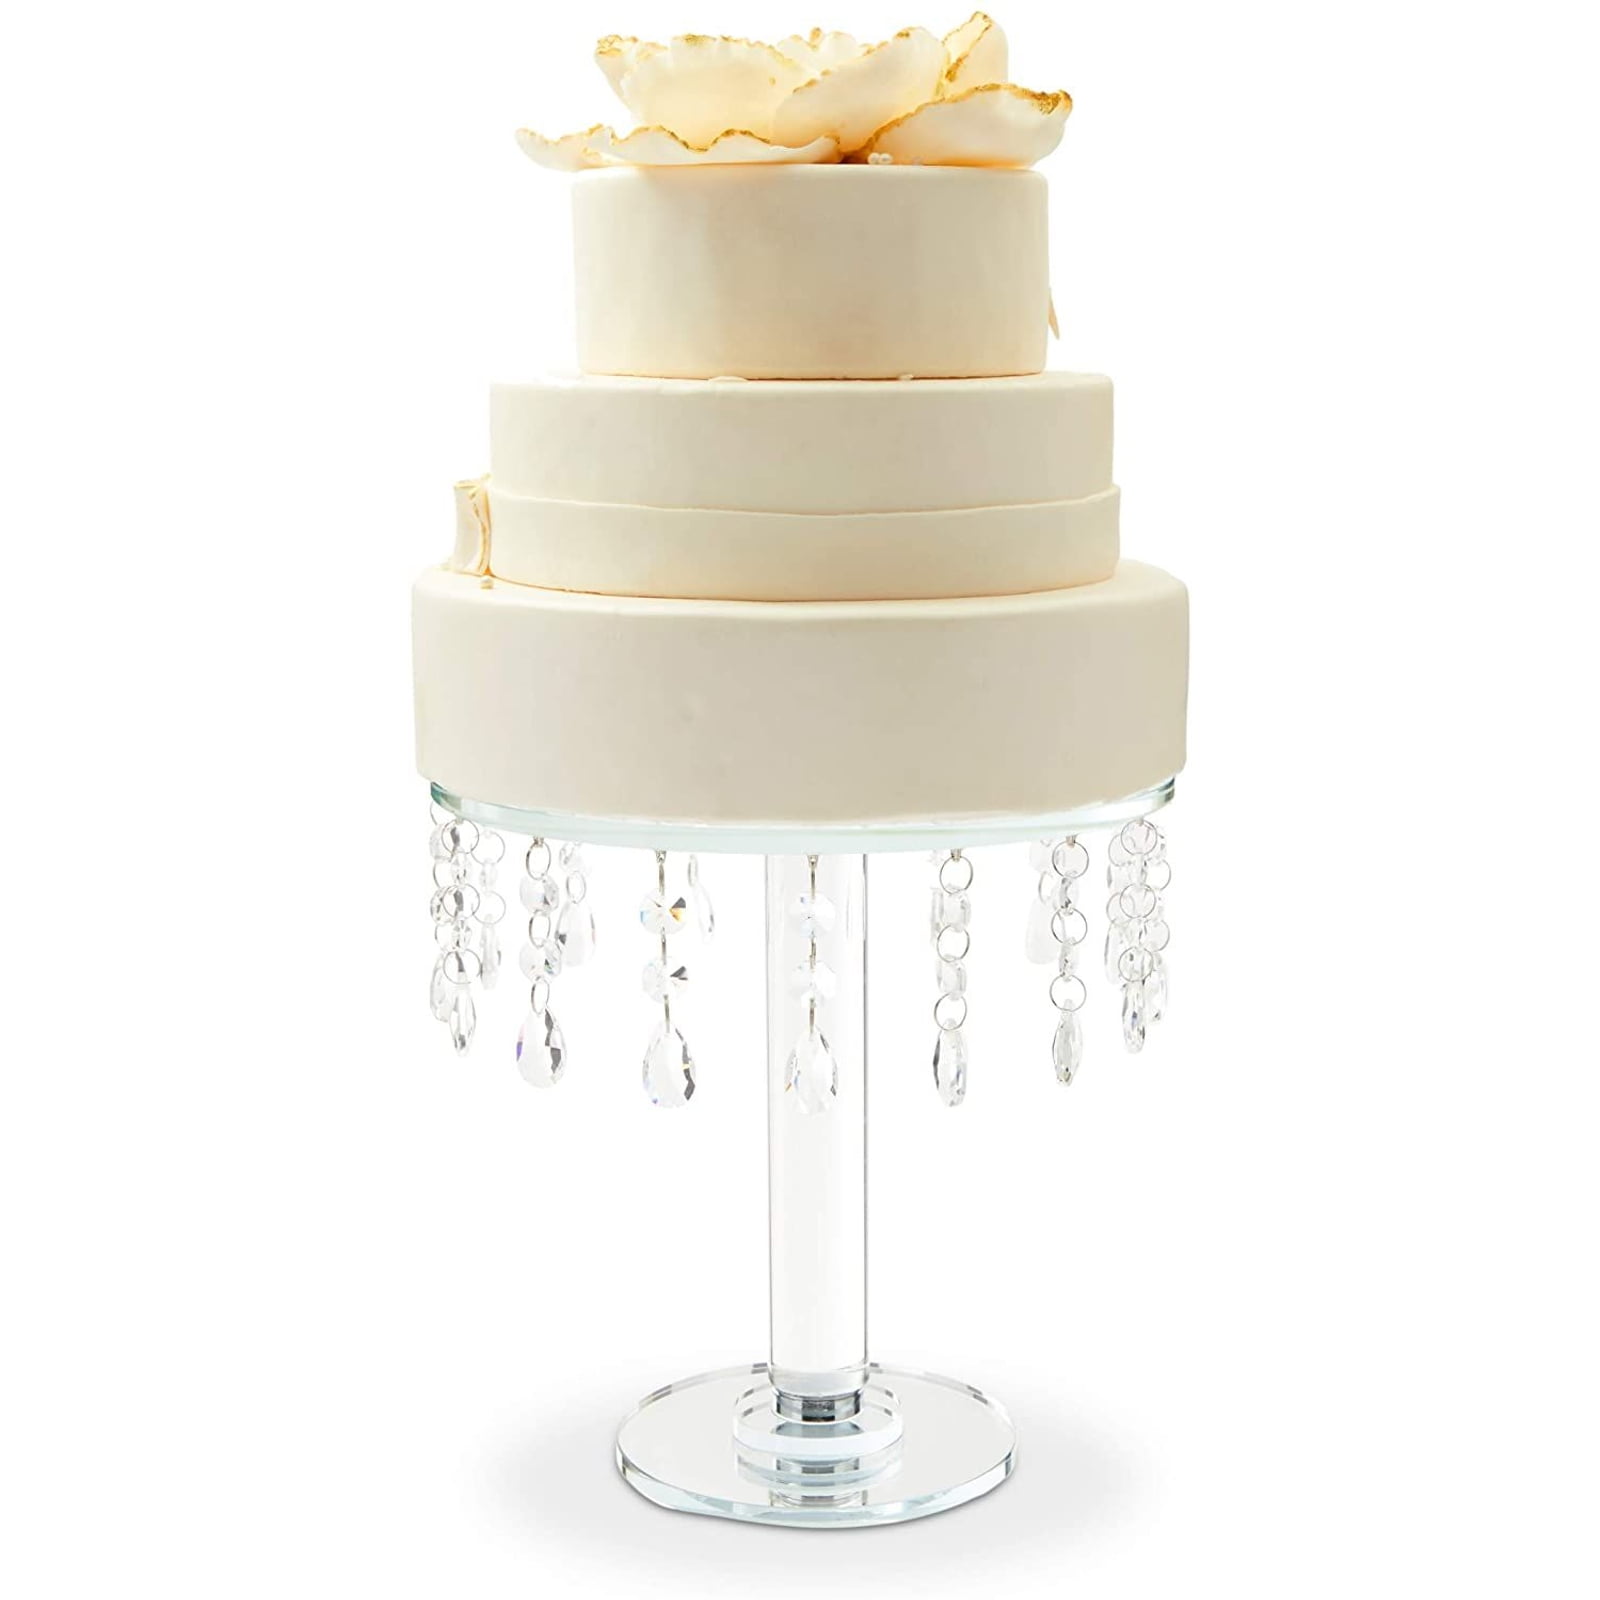 Square Round Cake StandChandelier Gâteau StandCrystal Cake Stand pour mariage 